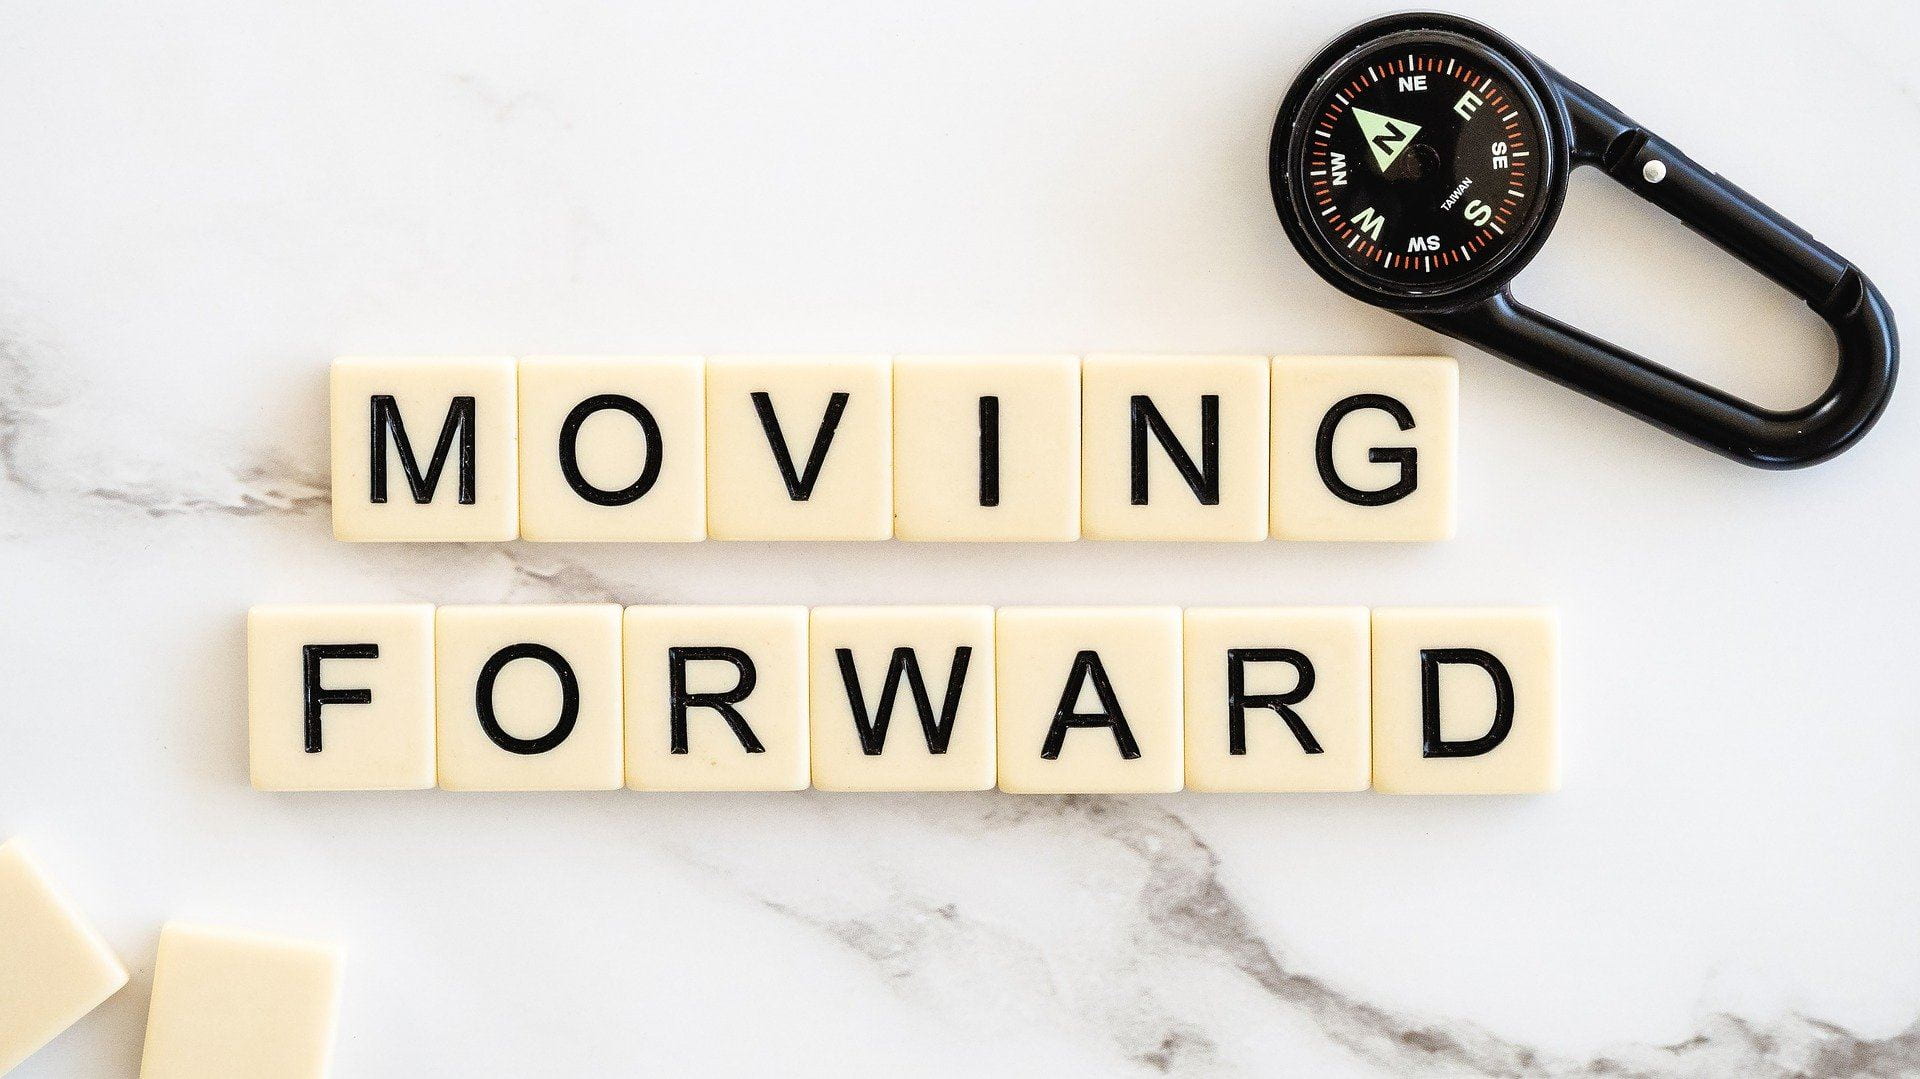 Moving forward laid out in scrabble tiles